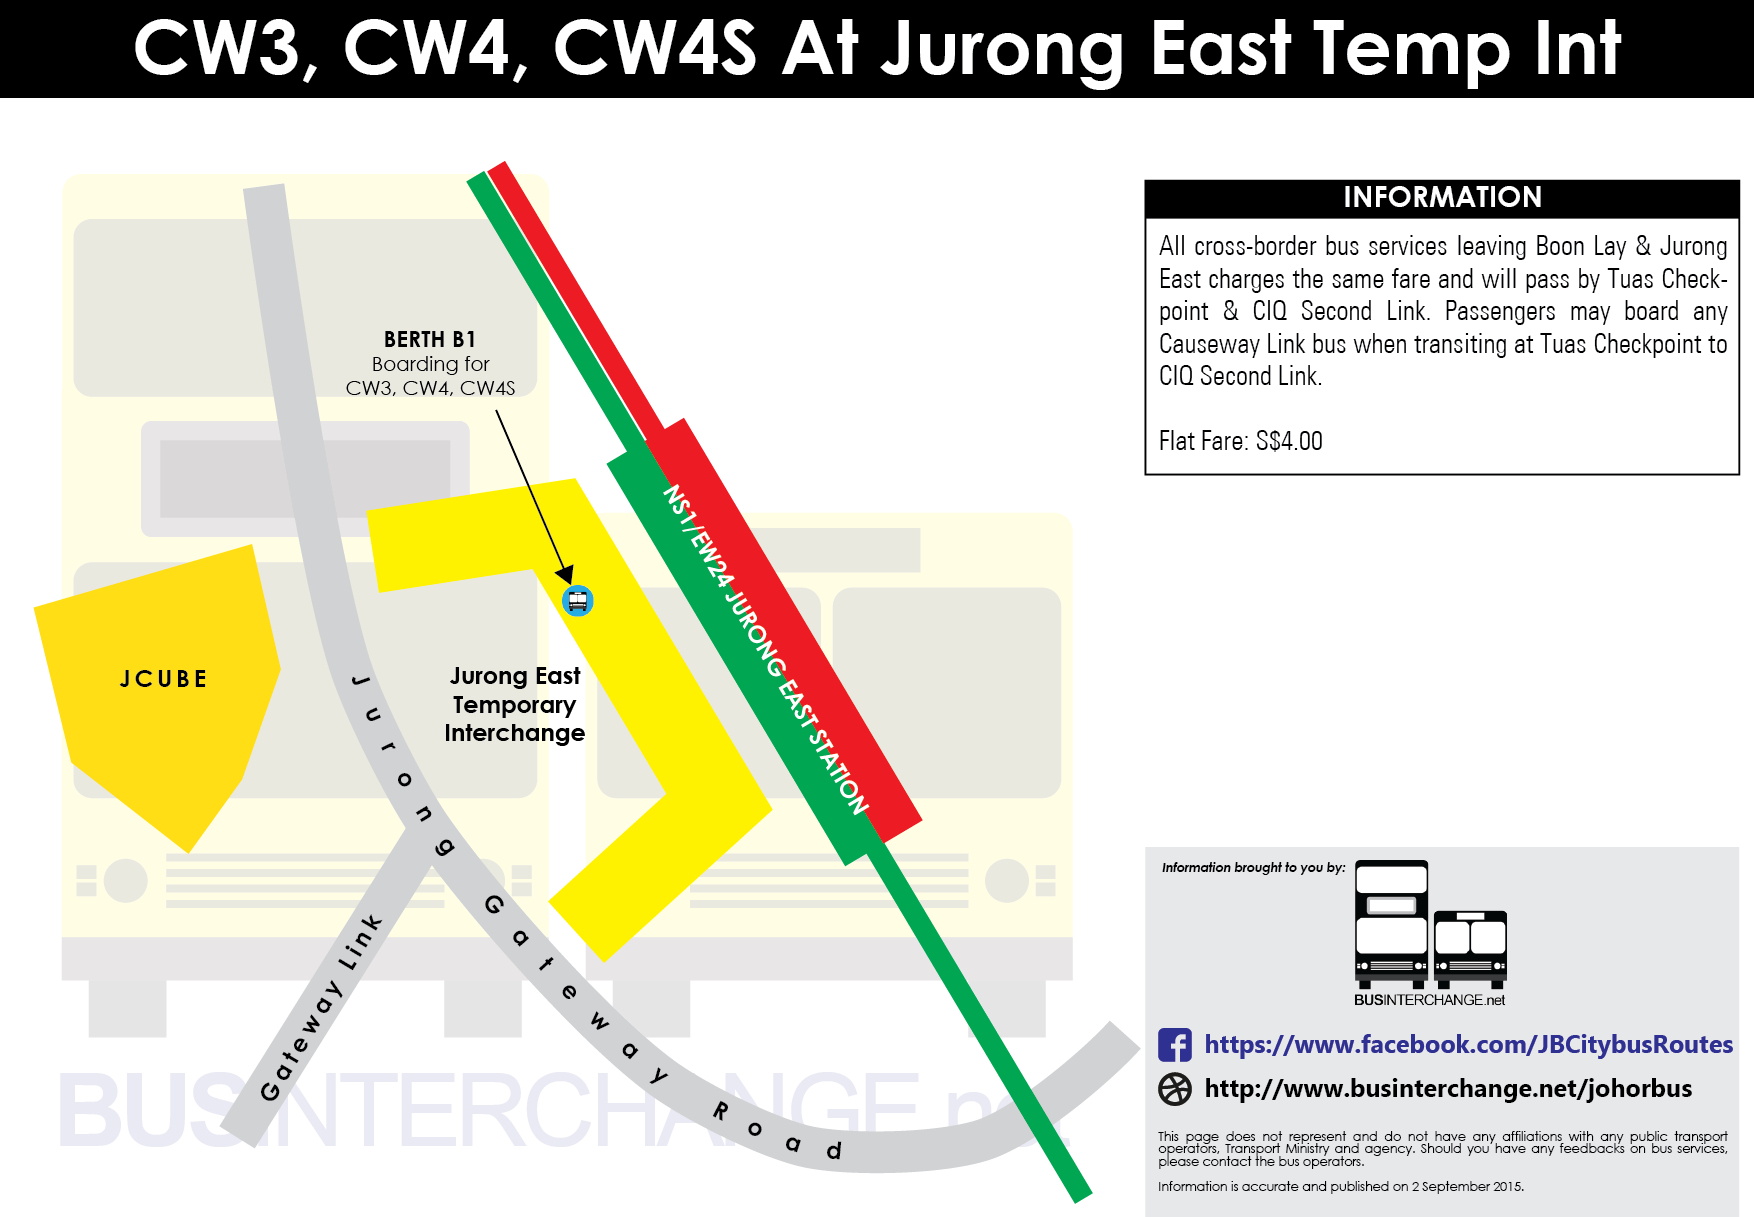 Boarding location at Jurong East for CW3, CW4 and CW4S